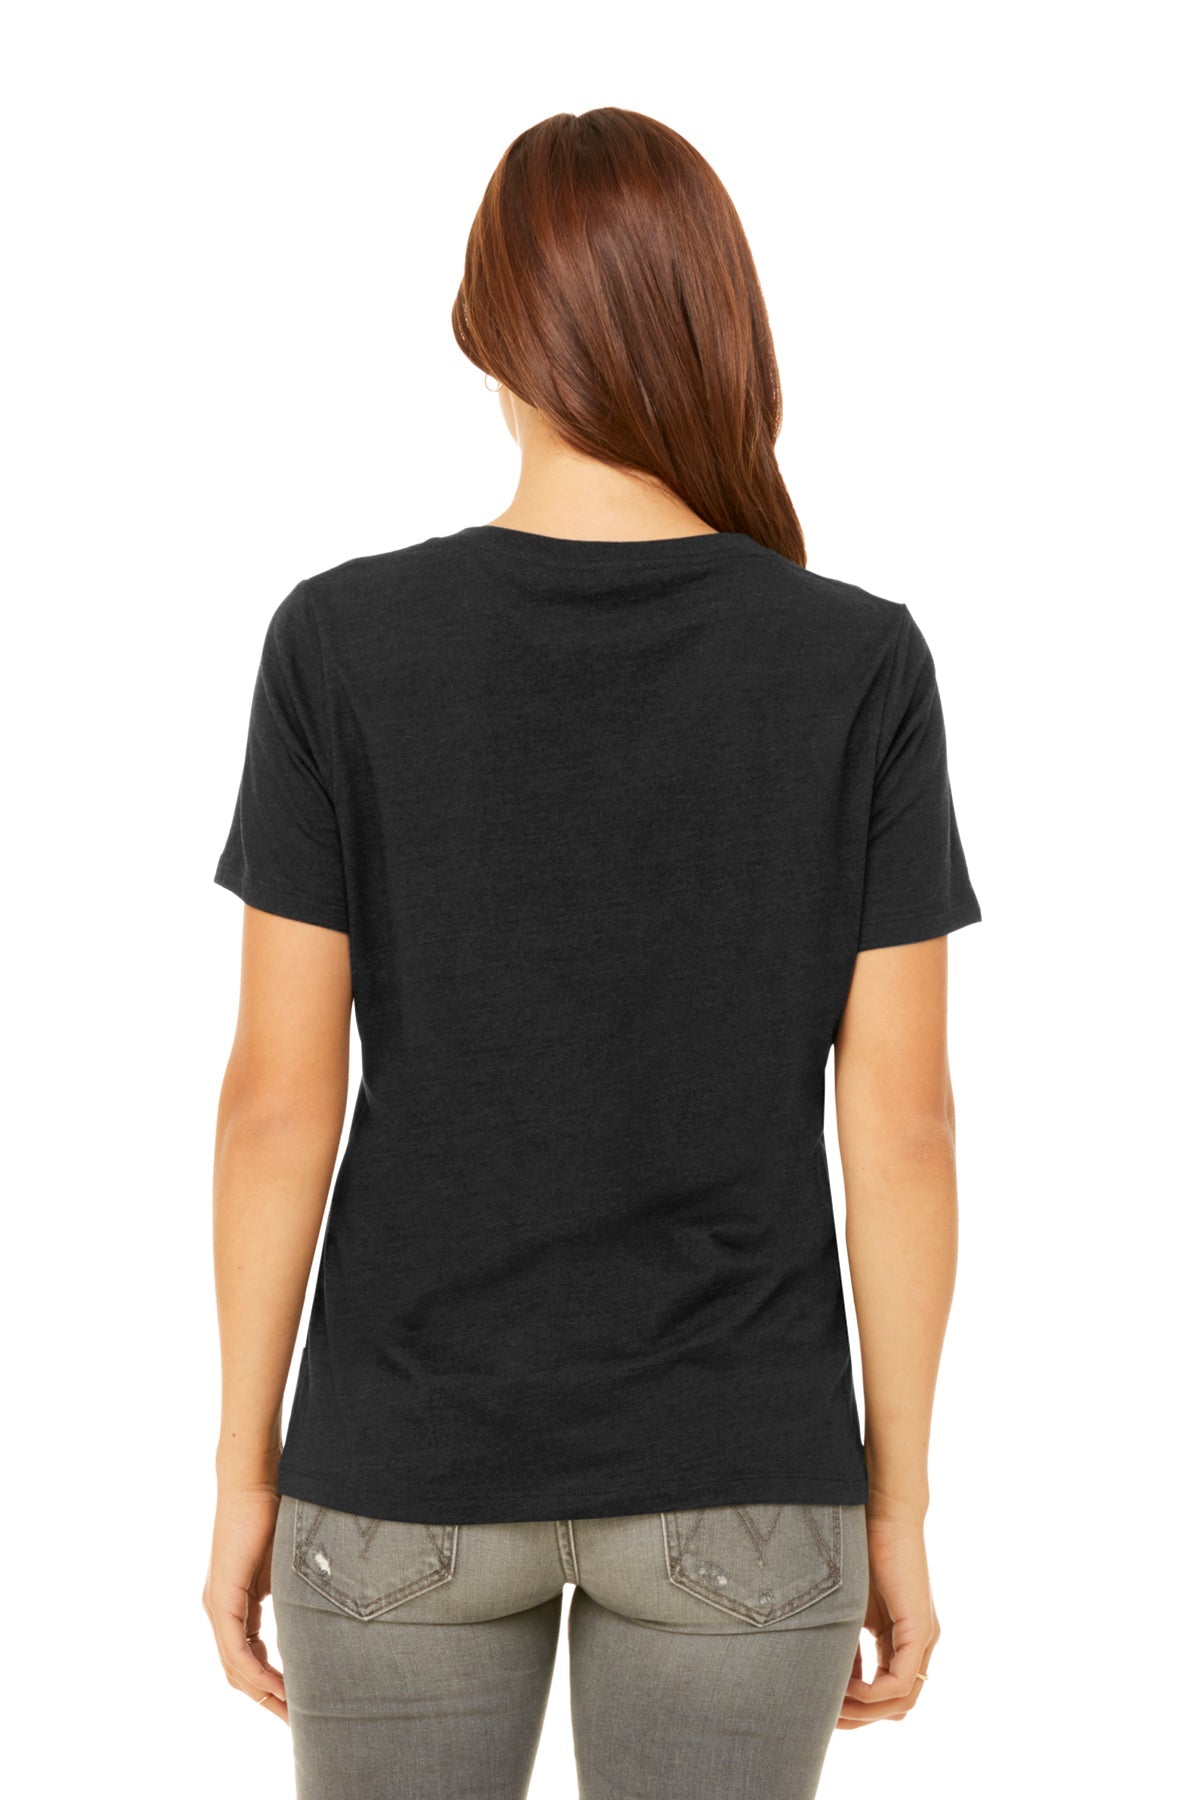 Bella Canvas Womens Relaxed Heather V-Neck, Black